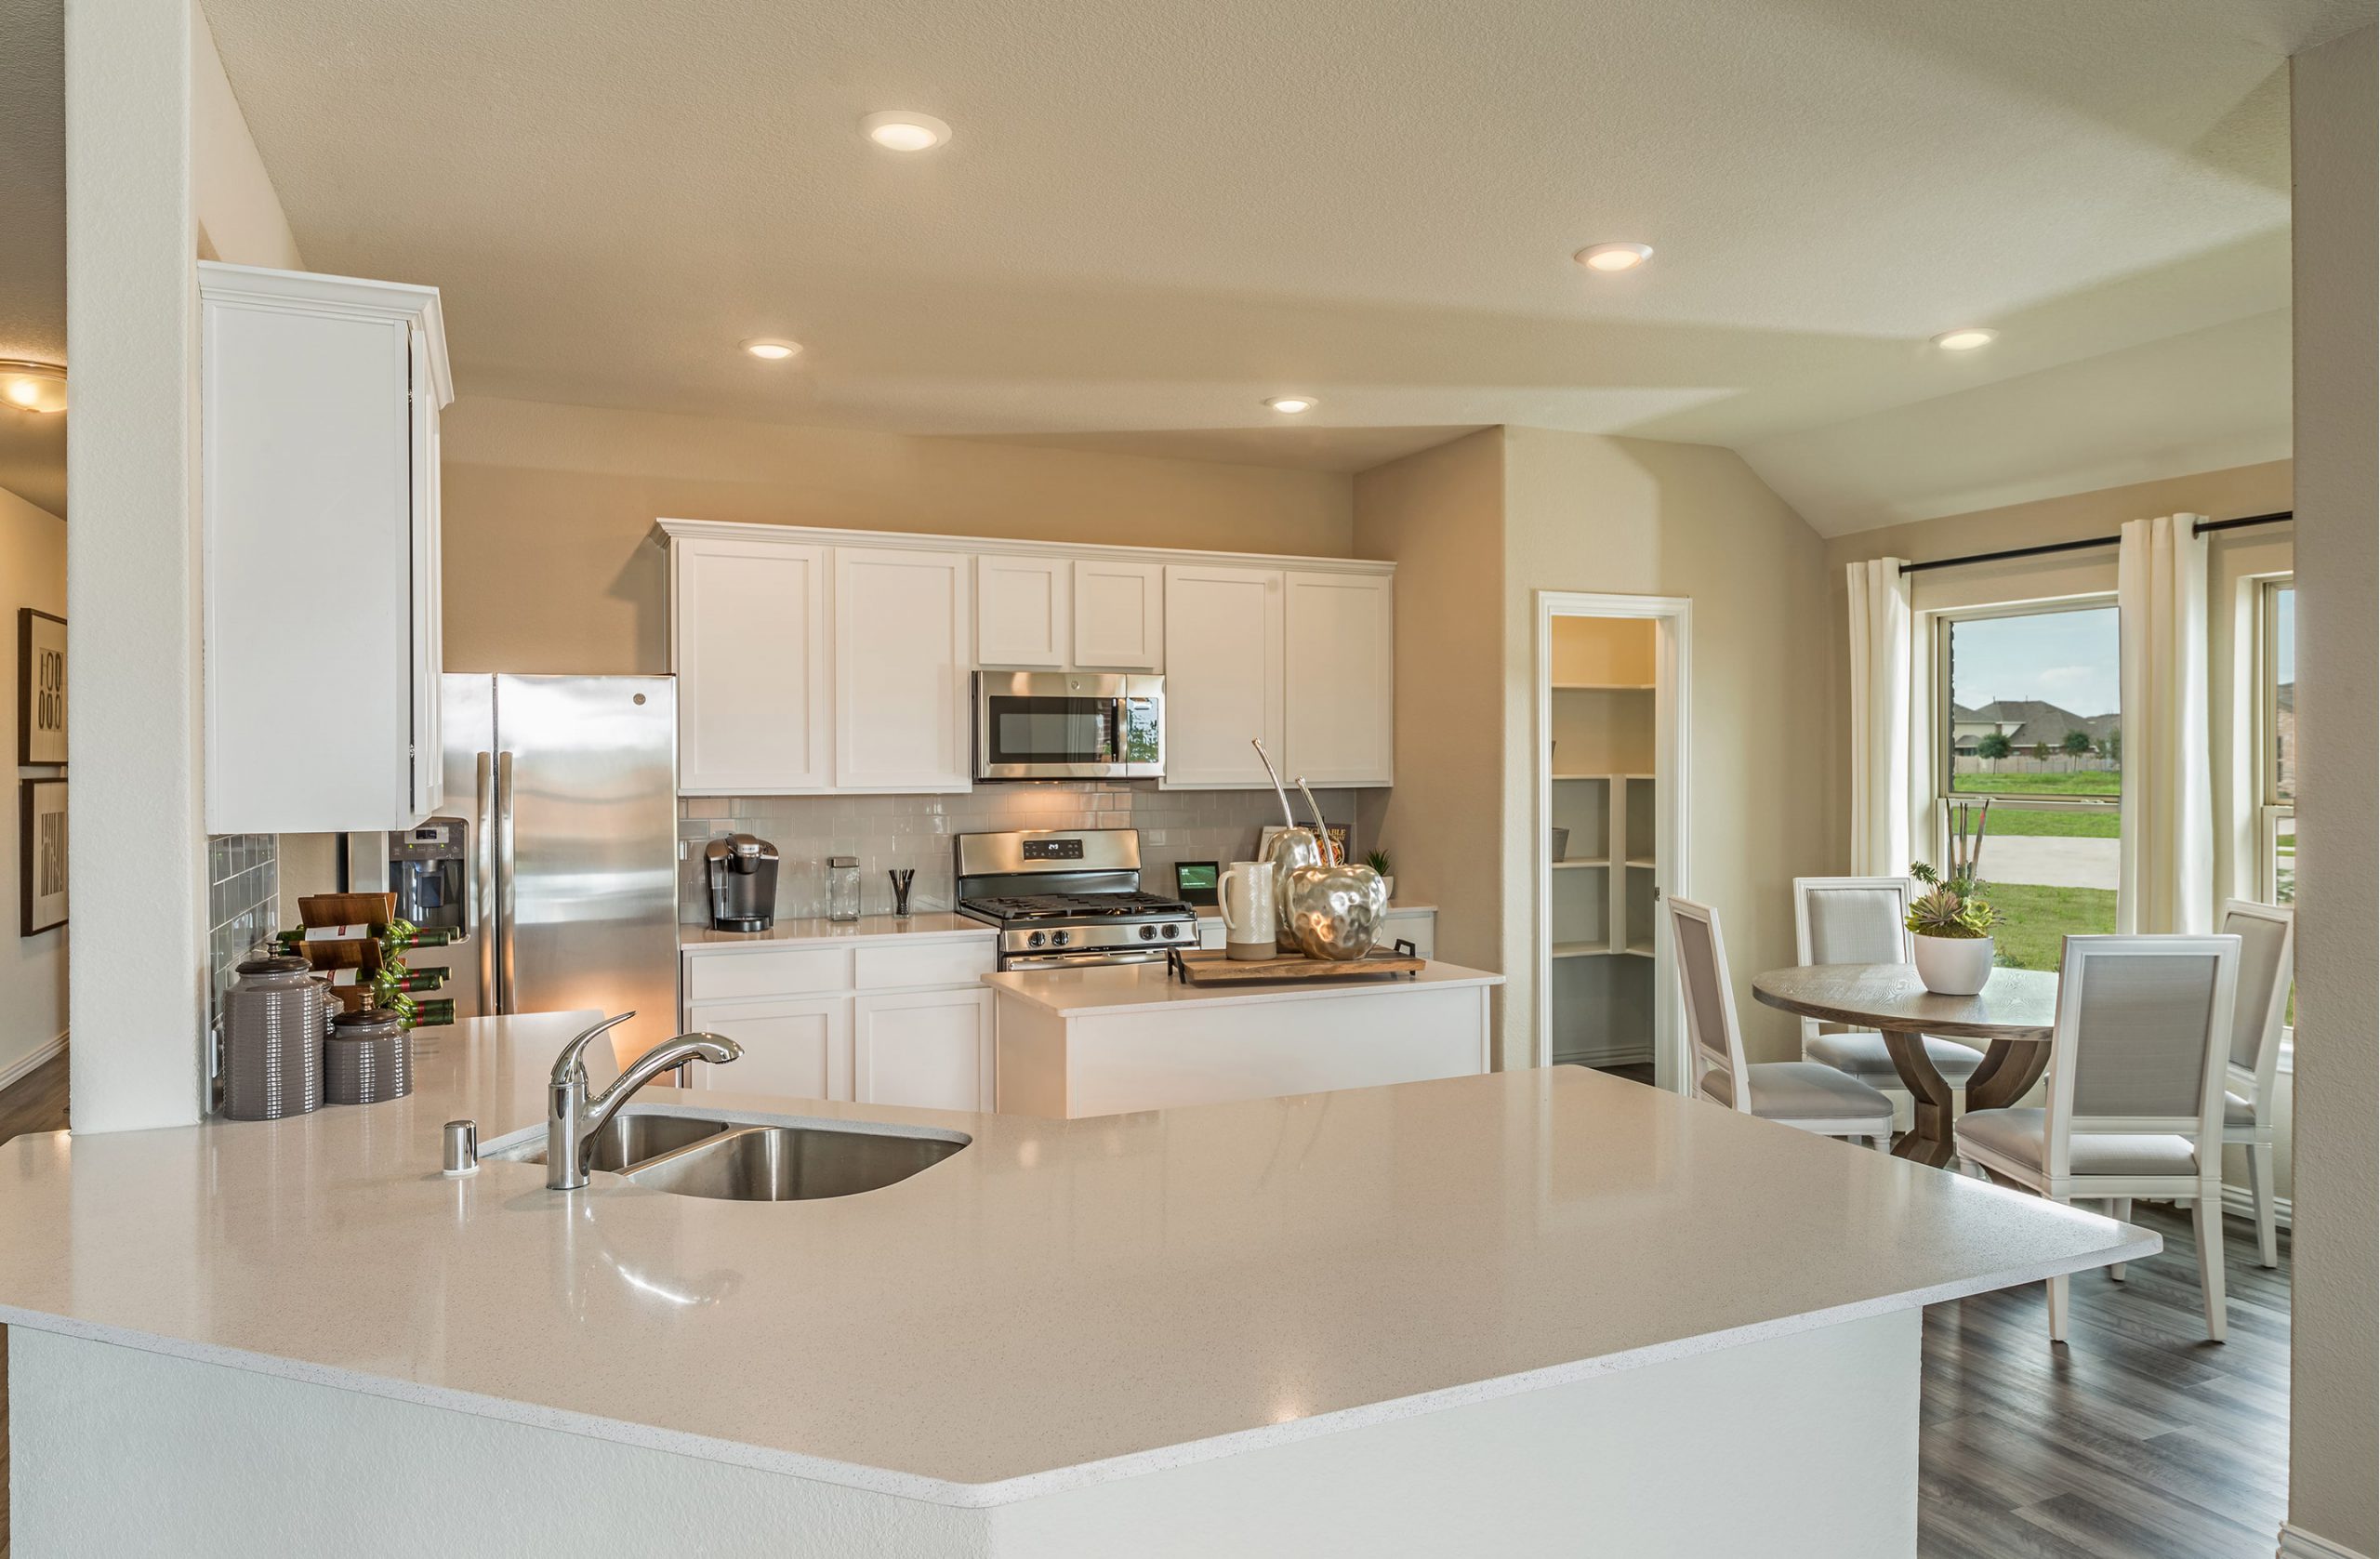 lennar-homes-photo-gallery-kitchen-05